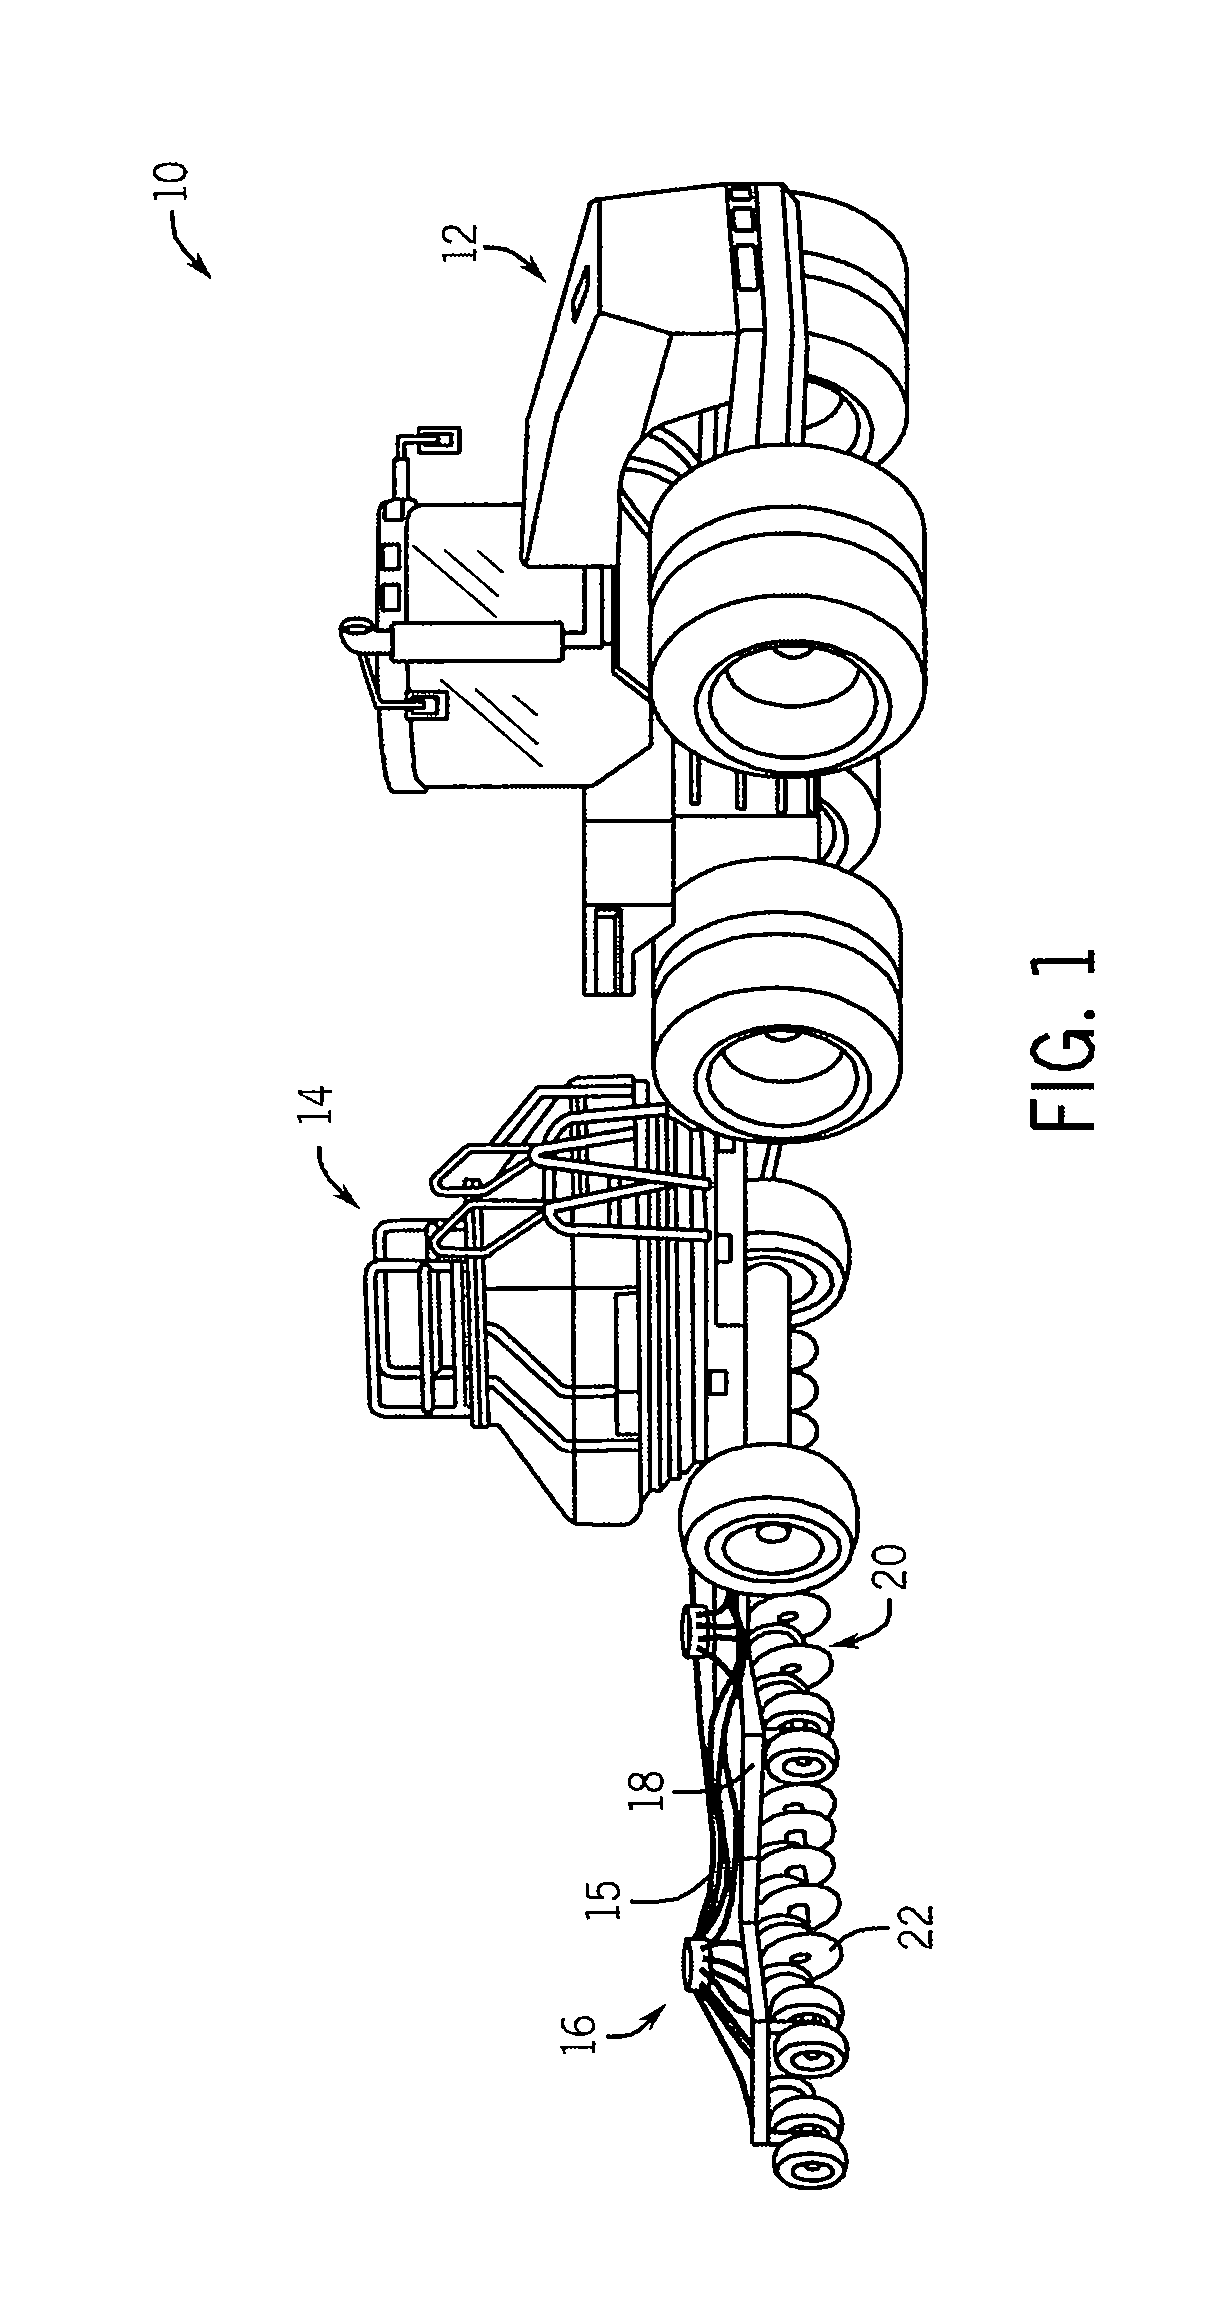 Down pressure adjustment device and method for use with a disc opener assembly of an agricultural implement